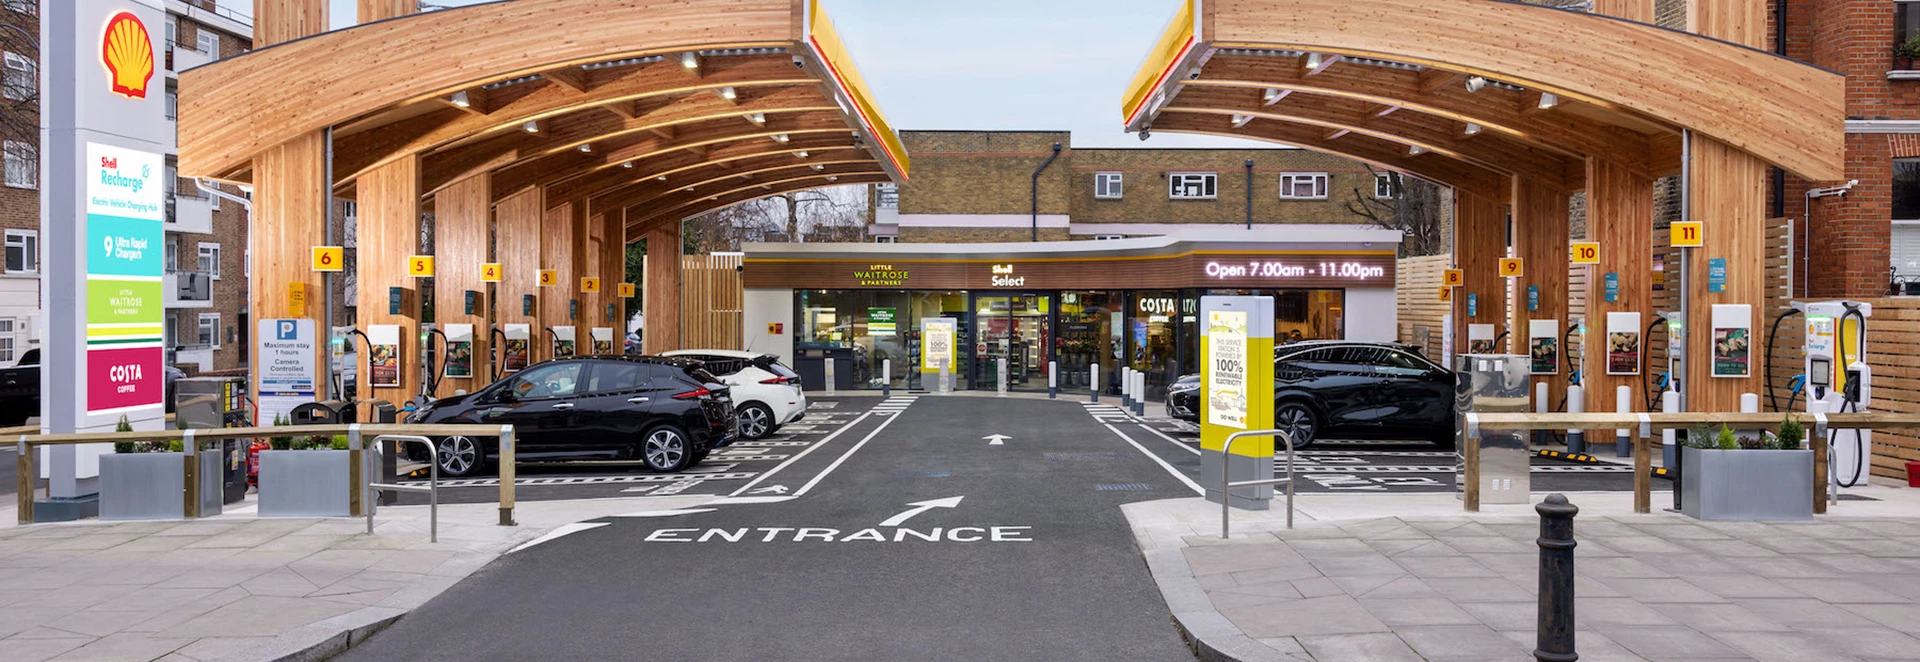 Shell replaces petrol pumps with electric car chargers at new London EV hub 